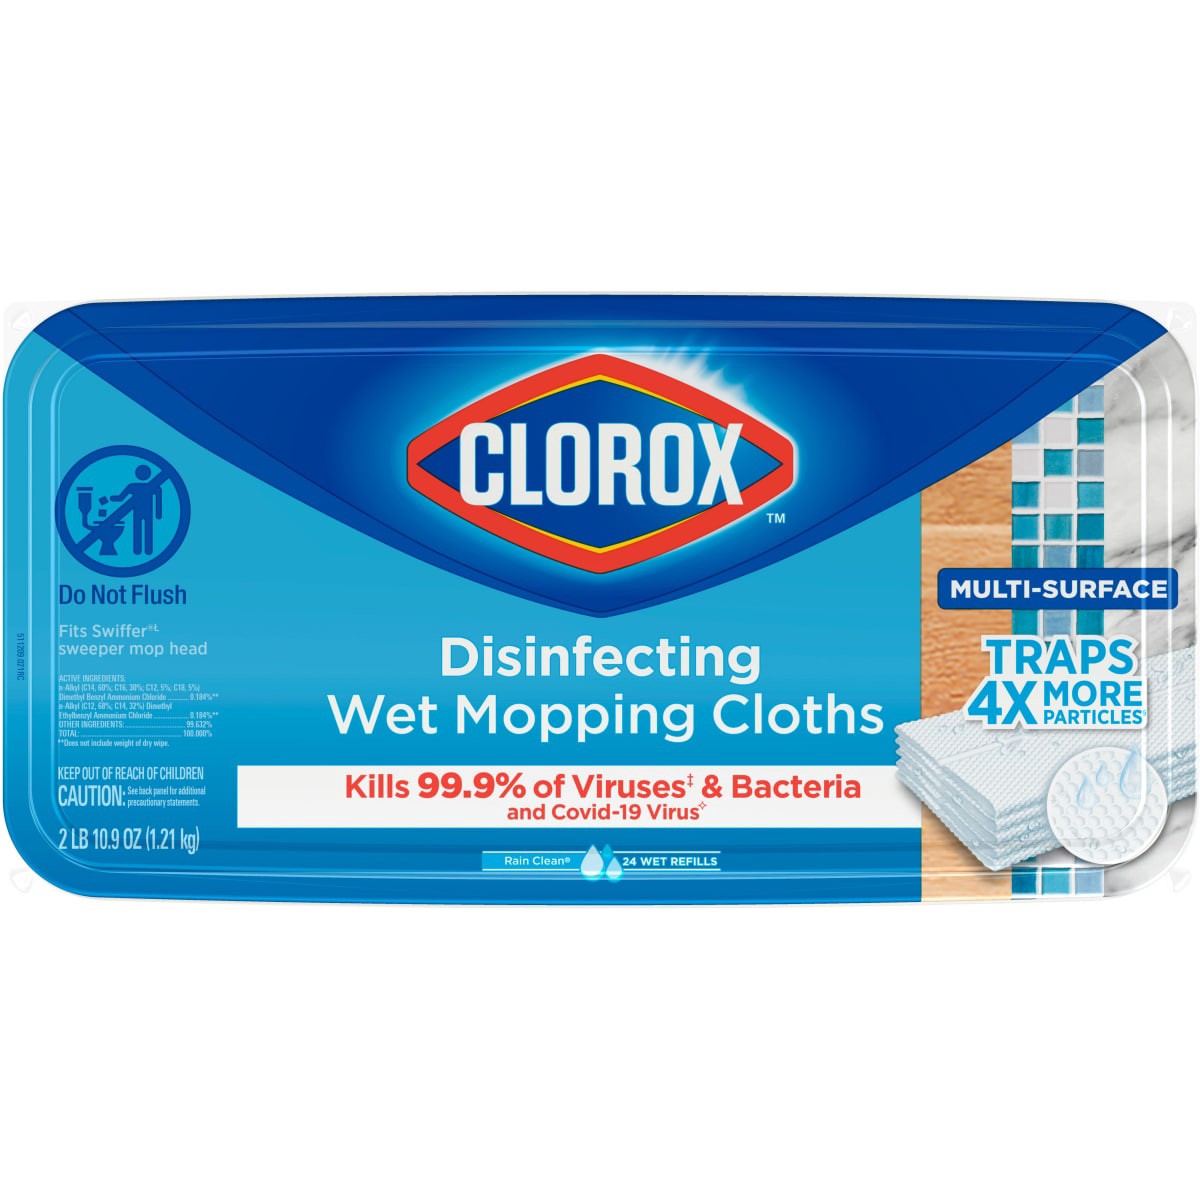 slide 27 of 29, Clorox Rain Clean Scent Bleach Free Disinfecting Wet Mopping Pad Refills, 24 ct